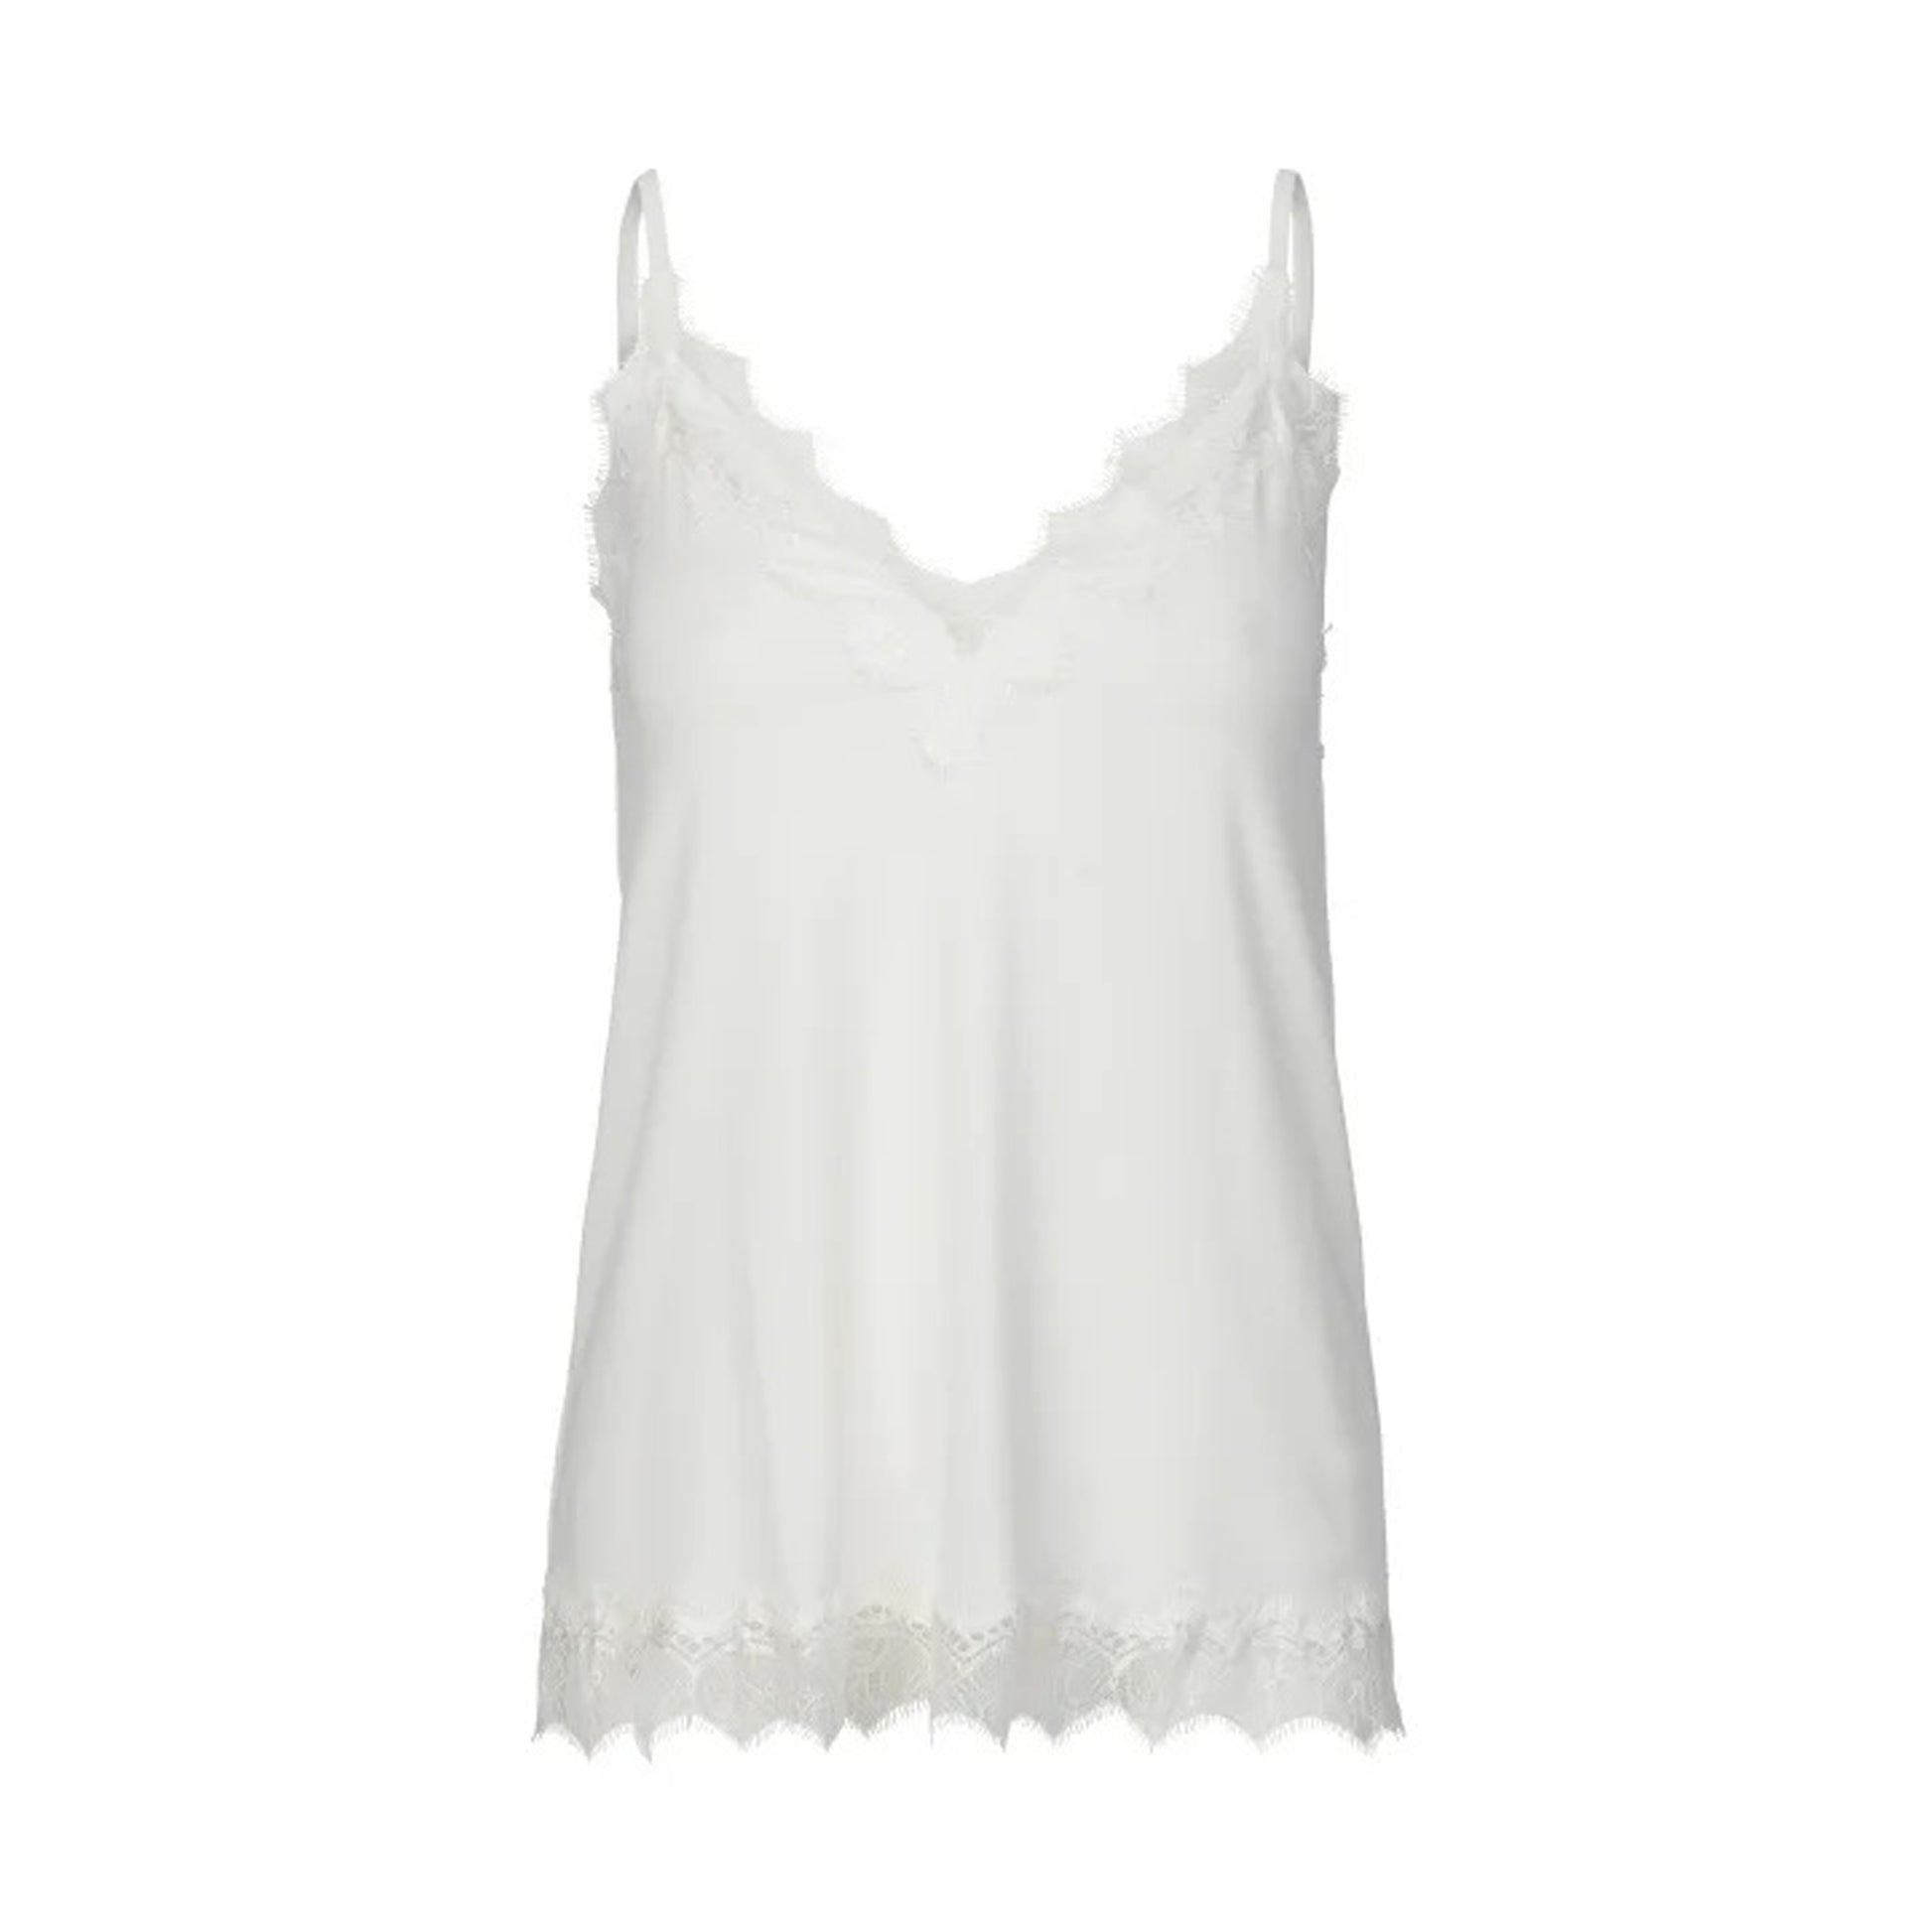 A Rosemunde Strap Lace Top with lace detailing and lightweight fabric.